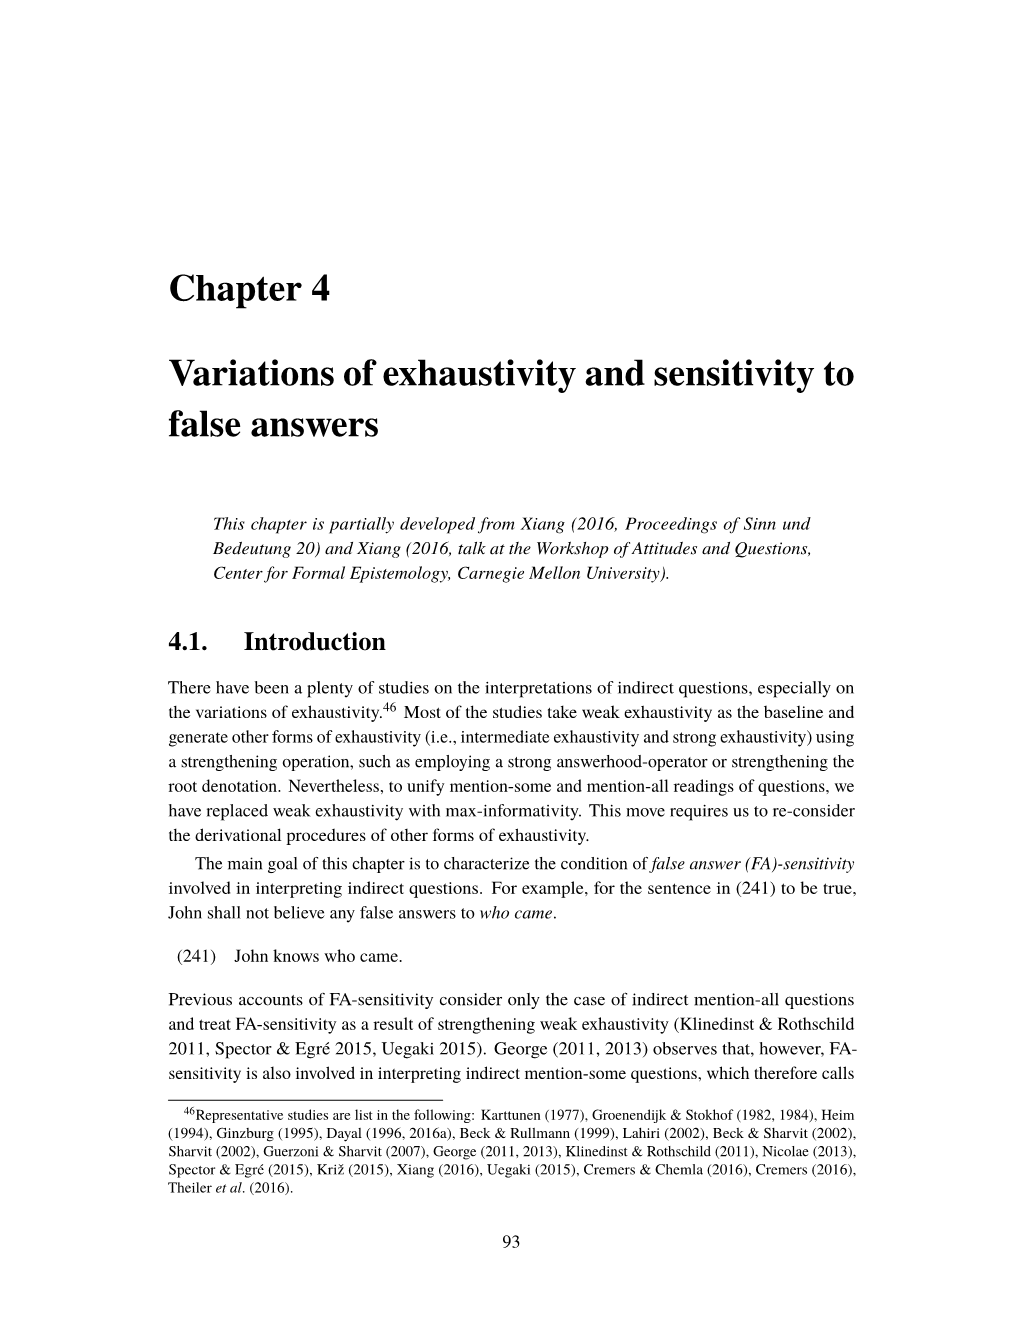 Chapter 4 Variations of Exhaustivity and Sensitivity to False Answers